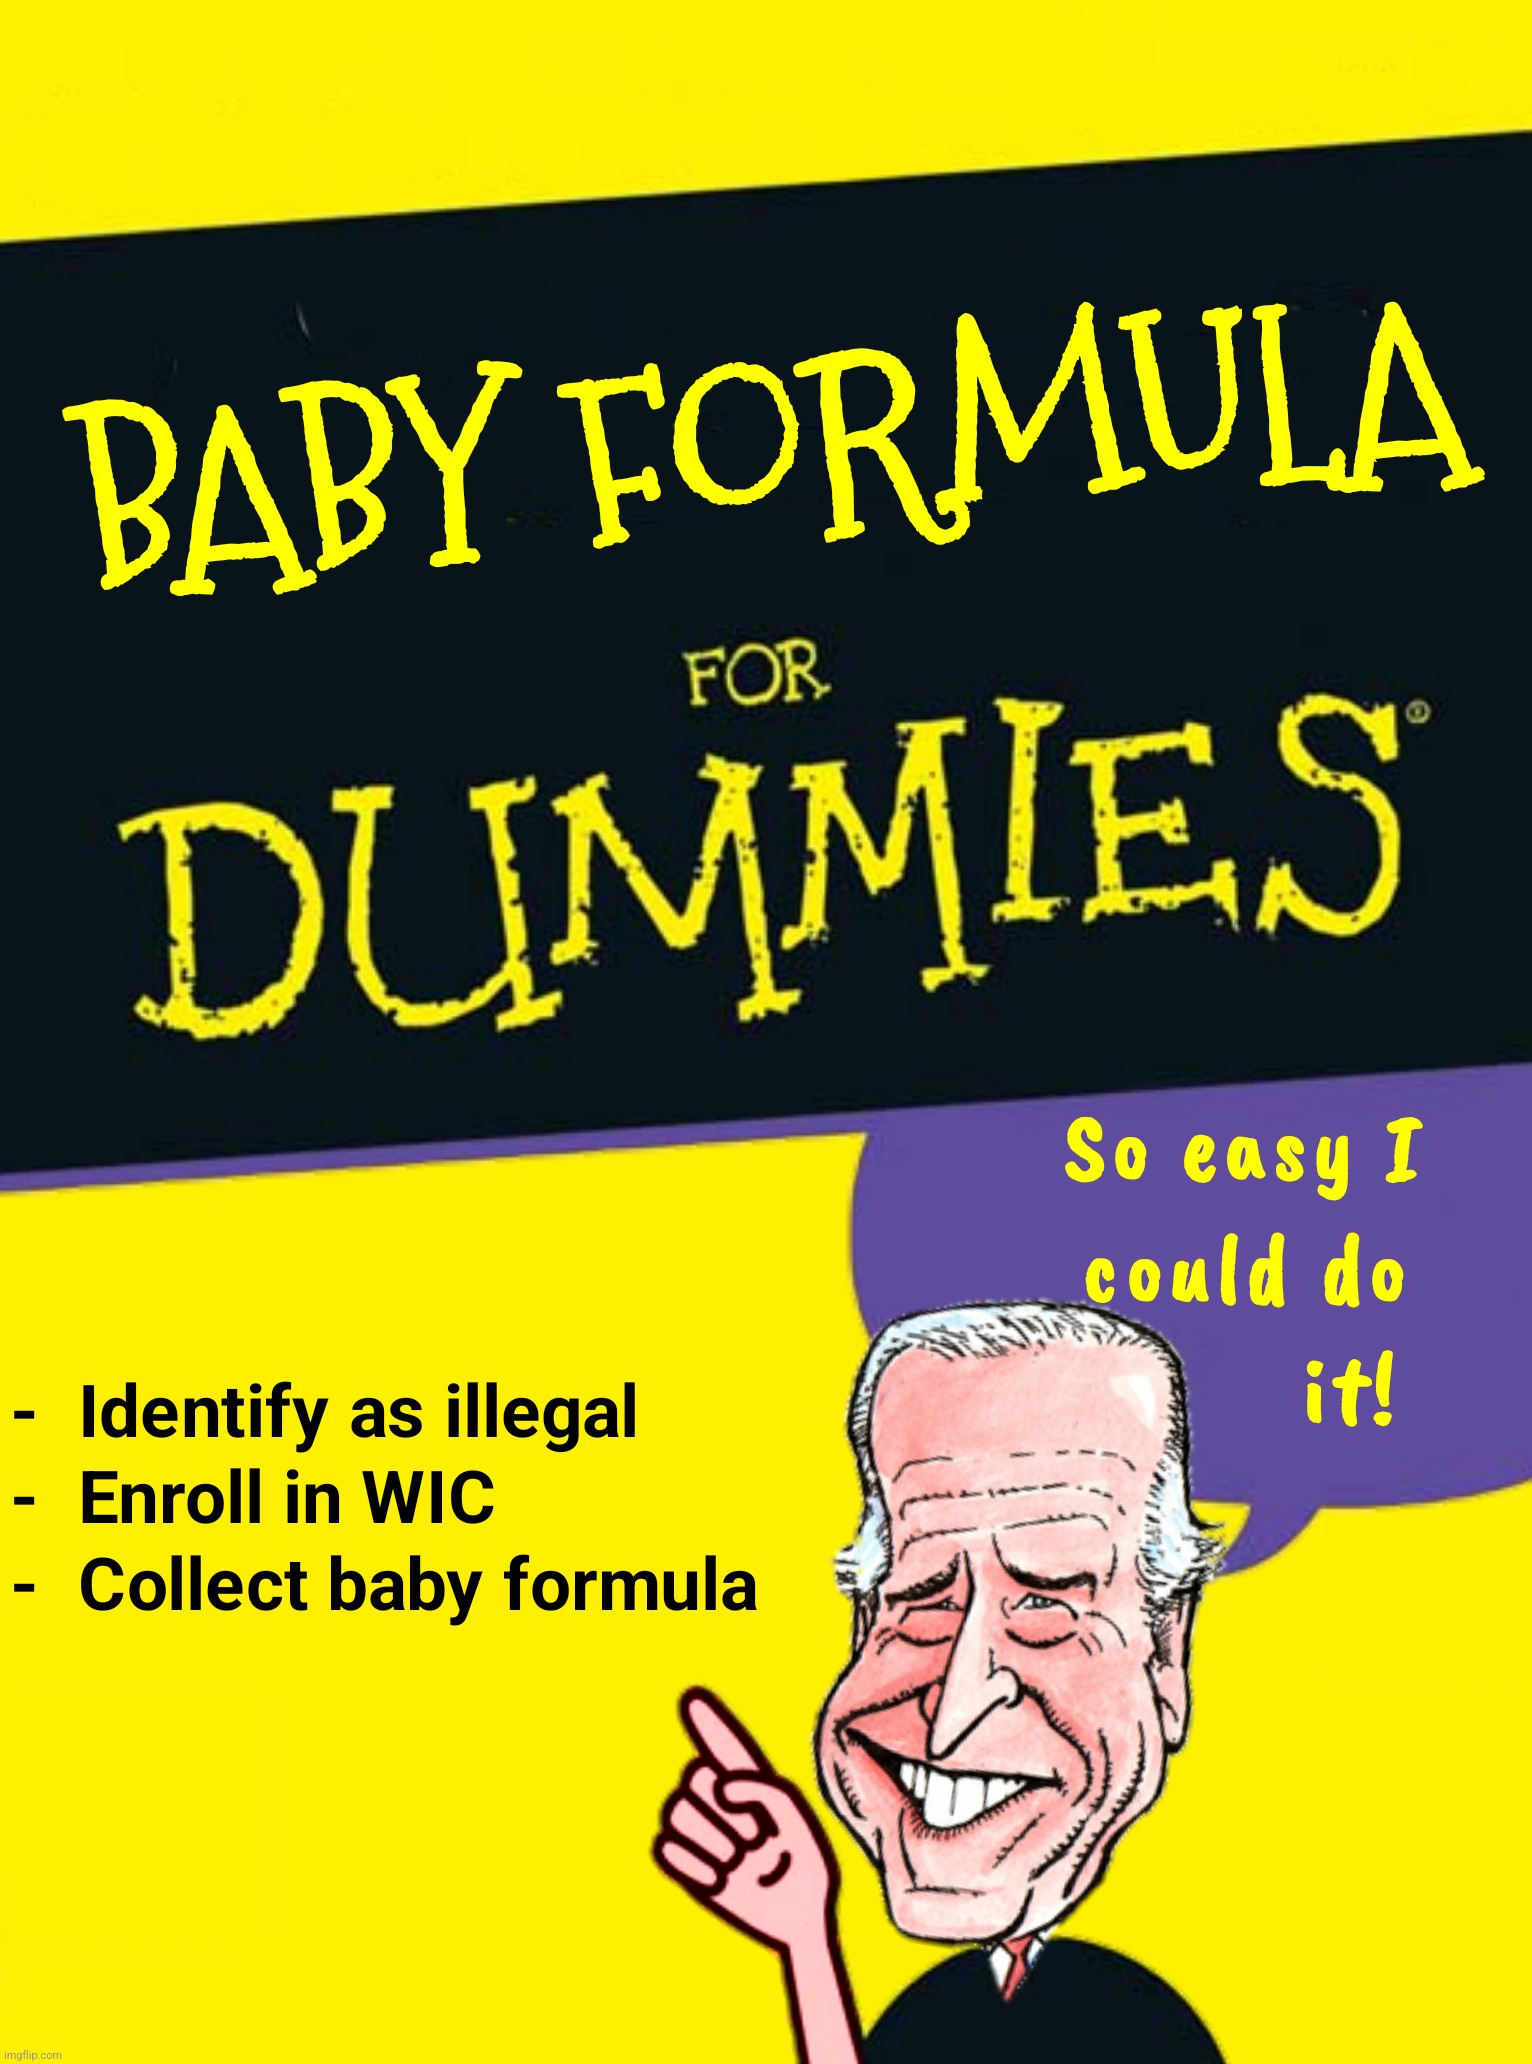 Bad Photoshop Sunday presents:  Now why didn't I think of that? | image tagged in bad photoshop sunday,joe biden,baby formula,baby formula for dummies | made w/ Imgflip meme maker